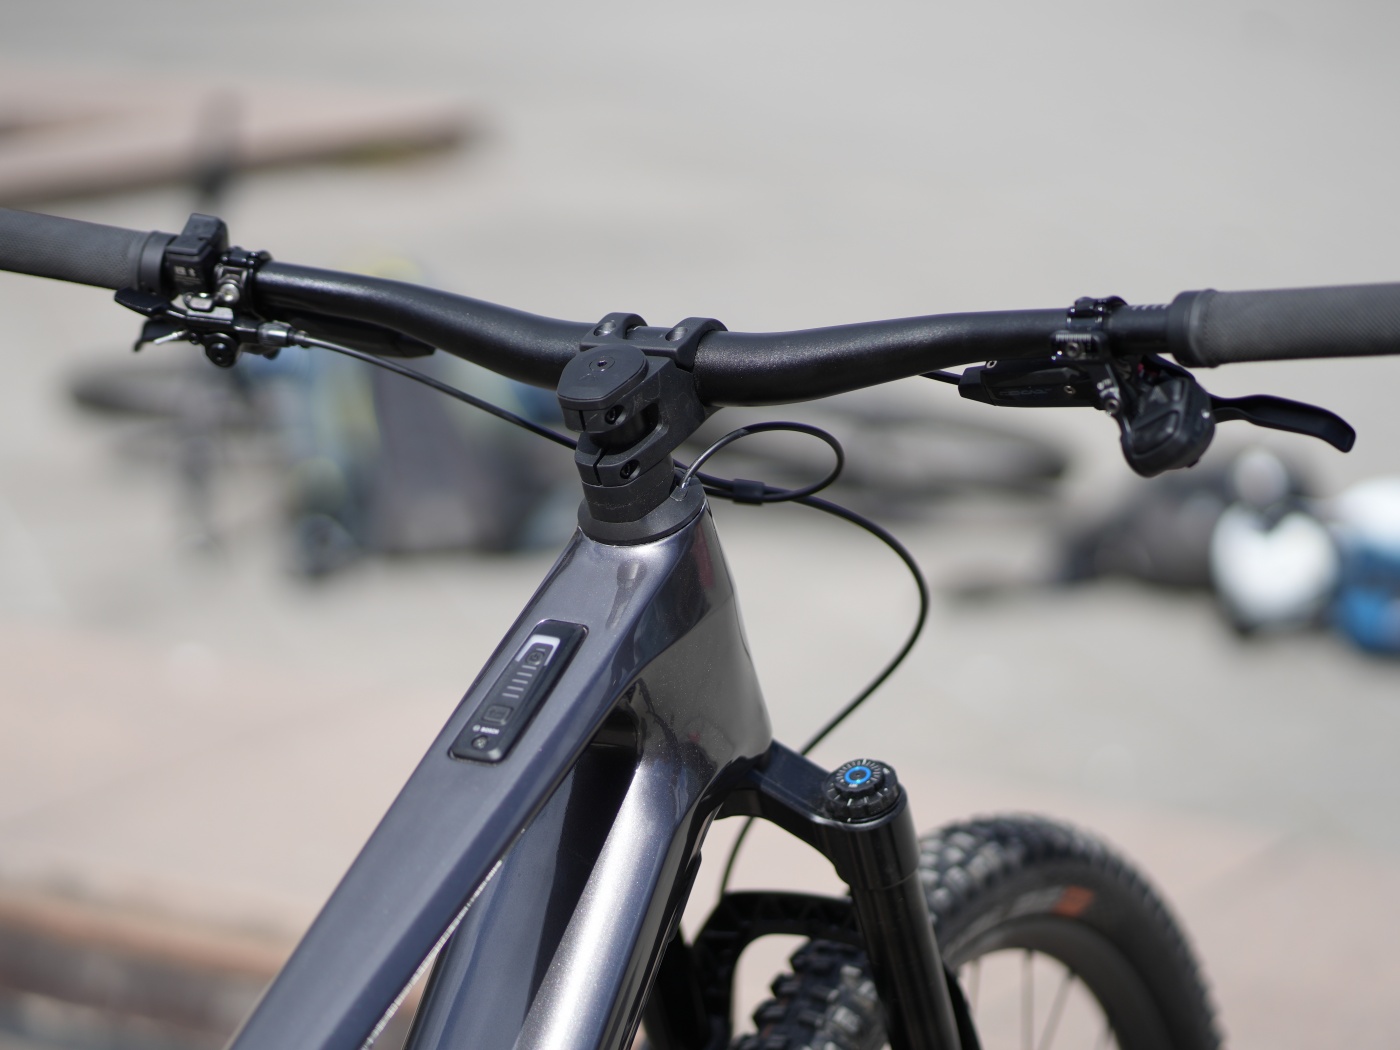 The Bosch System Controller sits integrated in the downtube. It contains the power-button and led-indicators